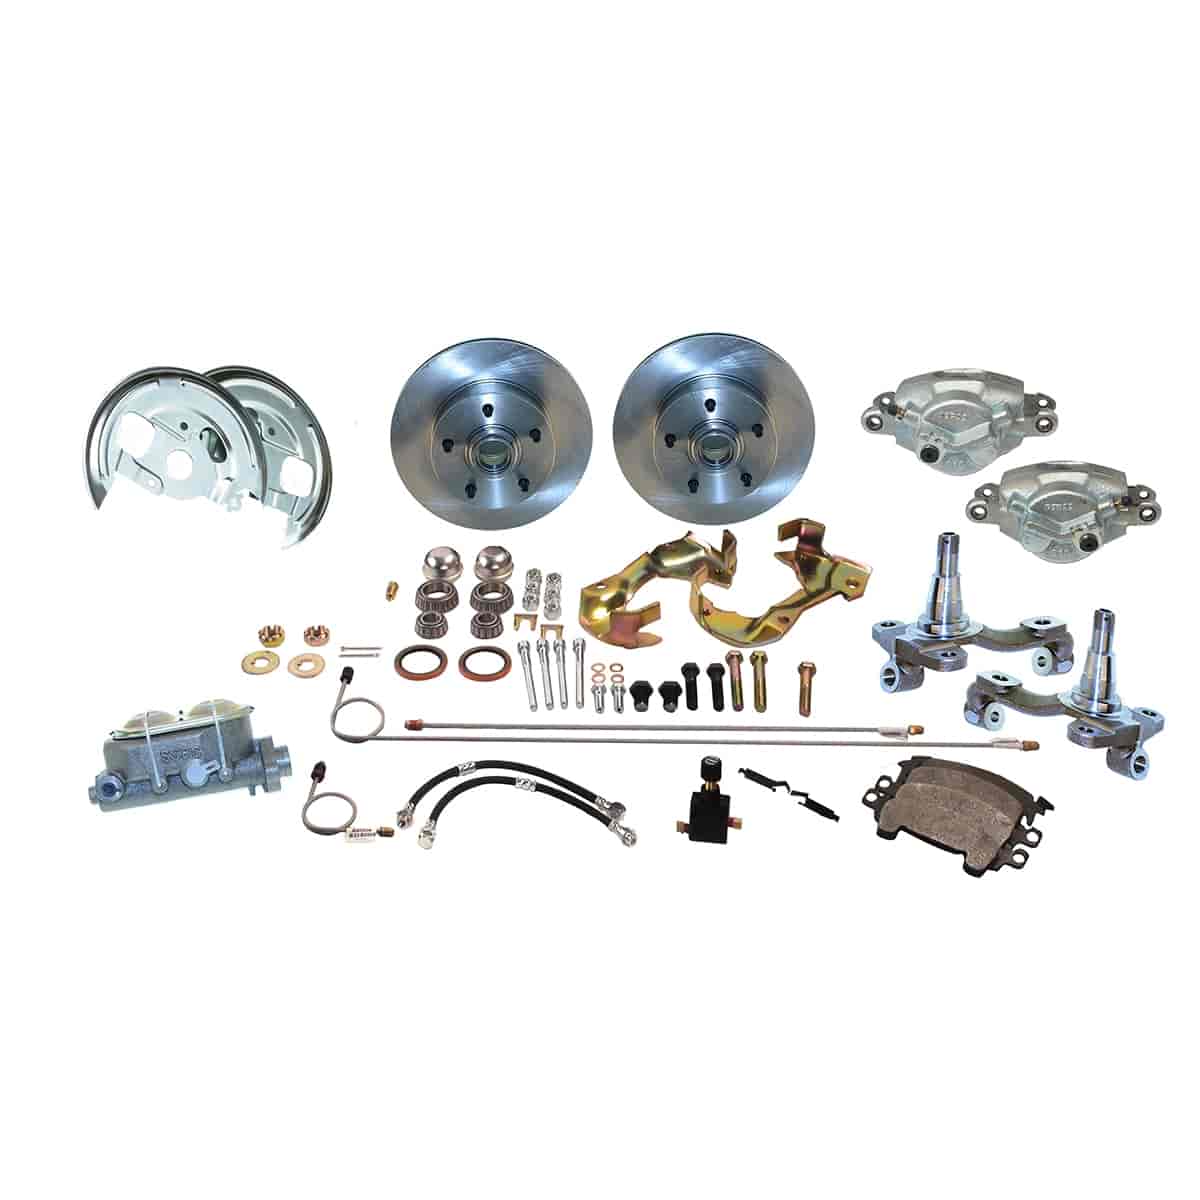 Front Drum-to-Disc Brake Conversion Kit 1962-67 Chevrolet Nova and Chevy II